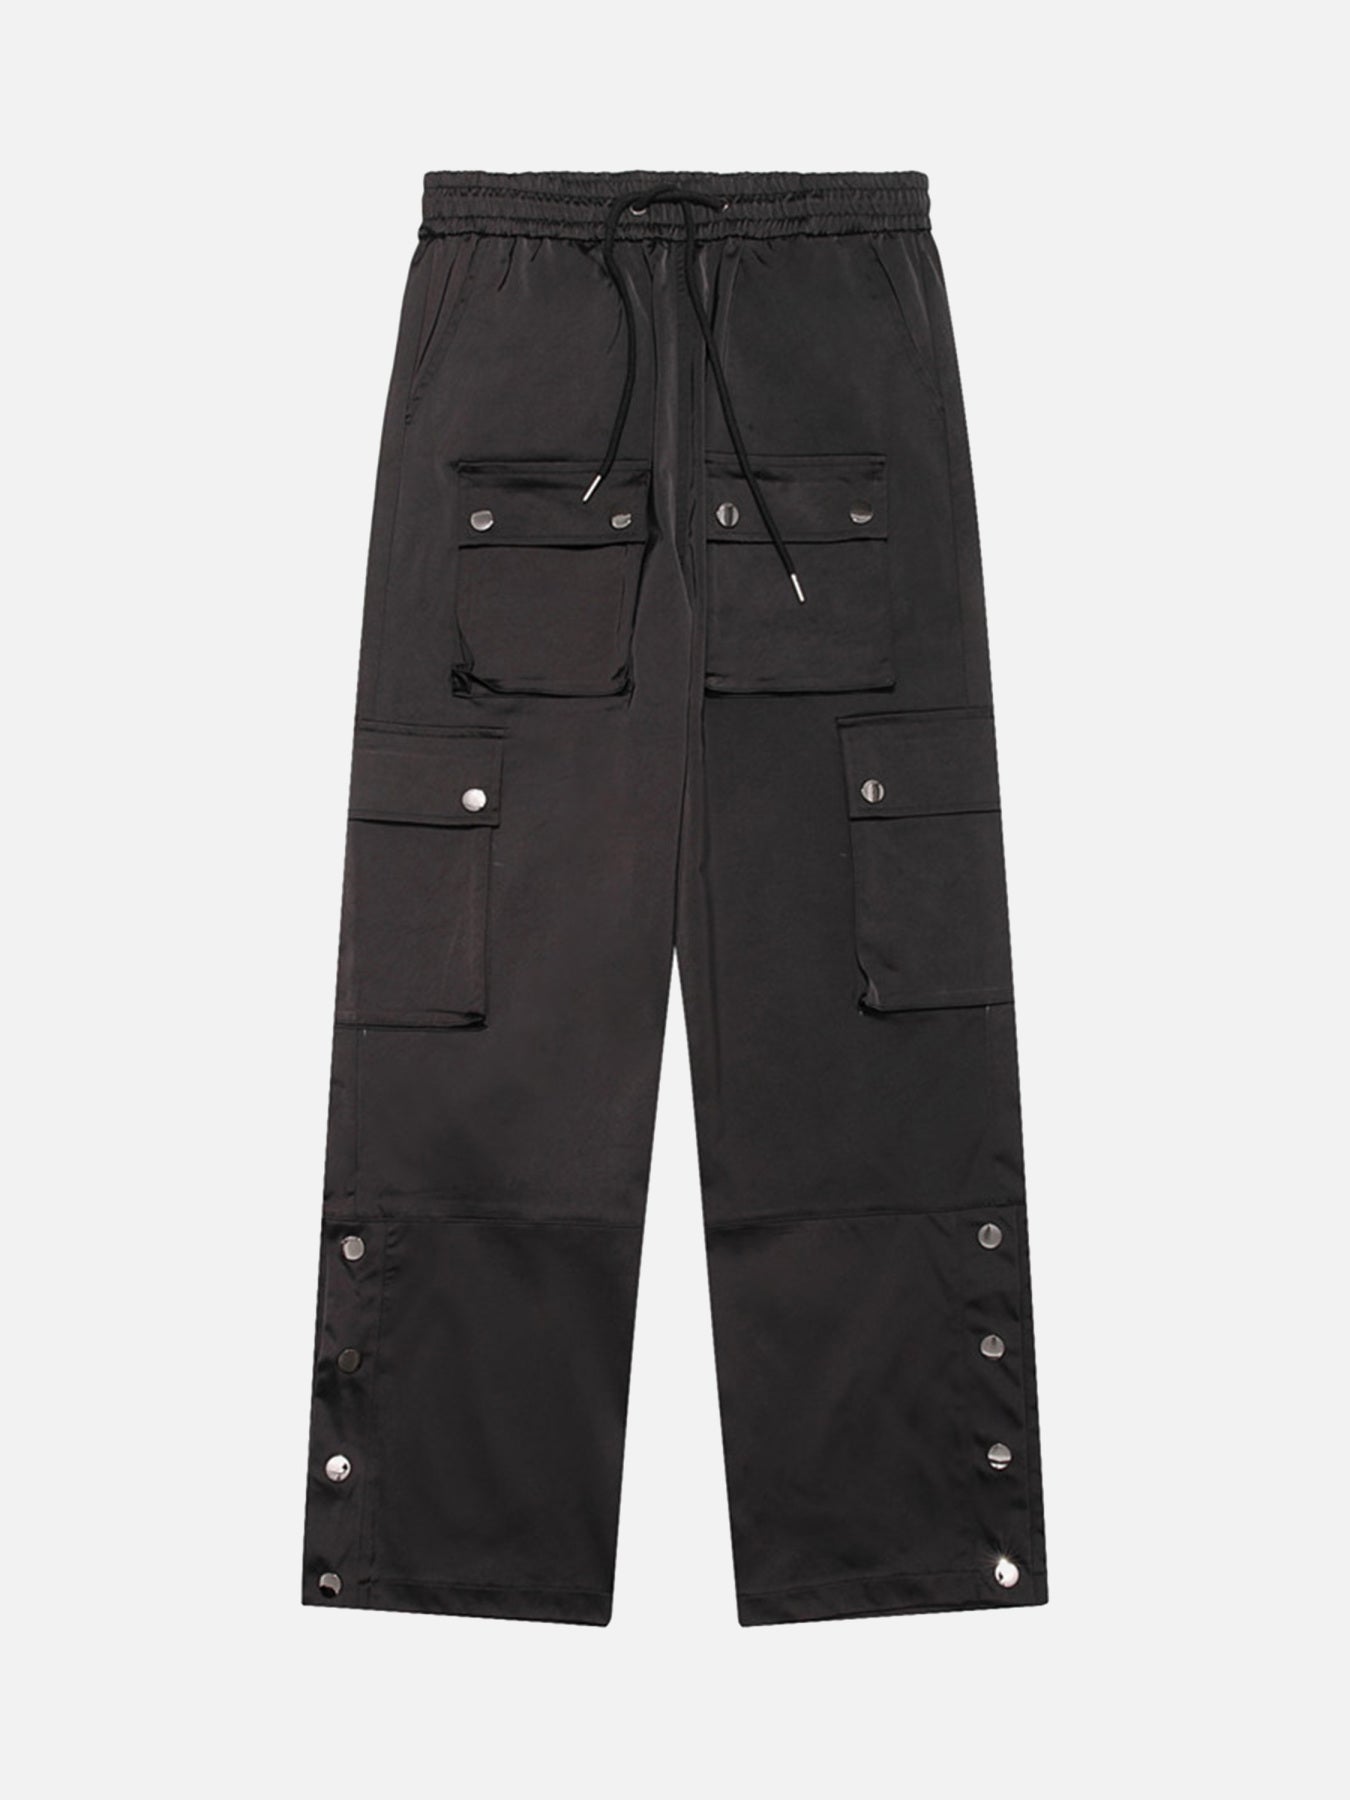 The Supermade Functional Windproof Workwear Straight Leg Pants